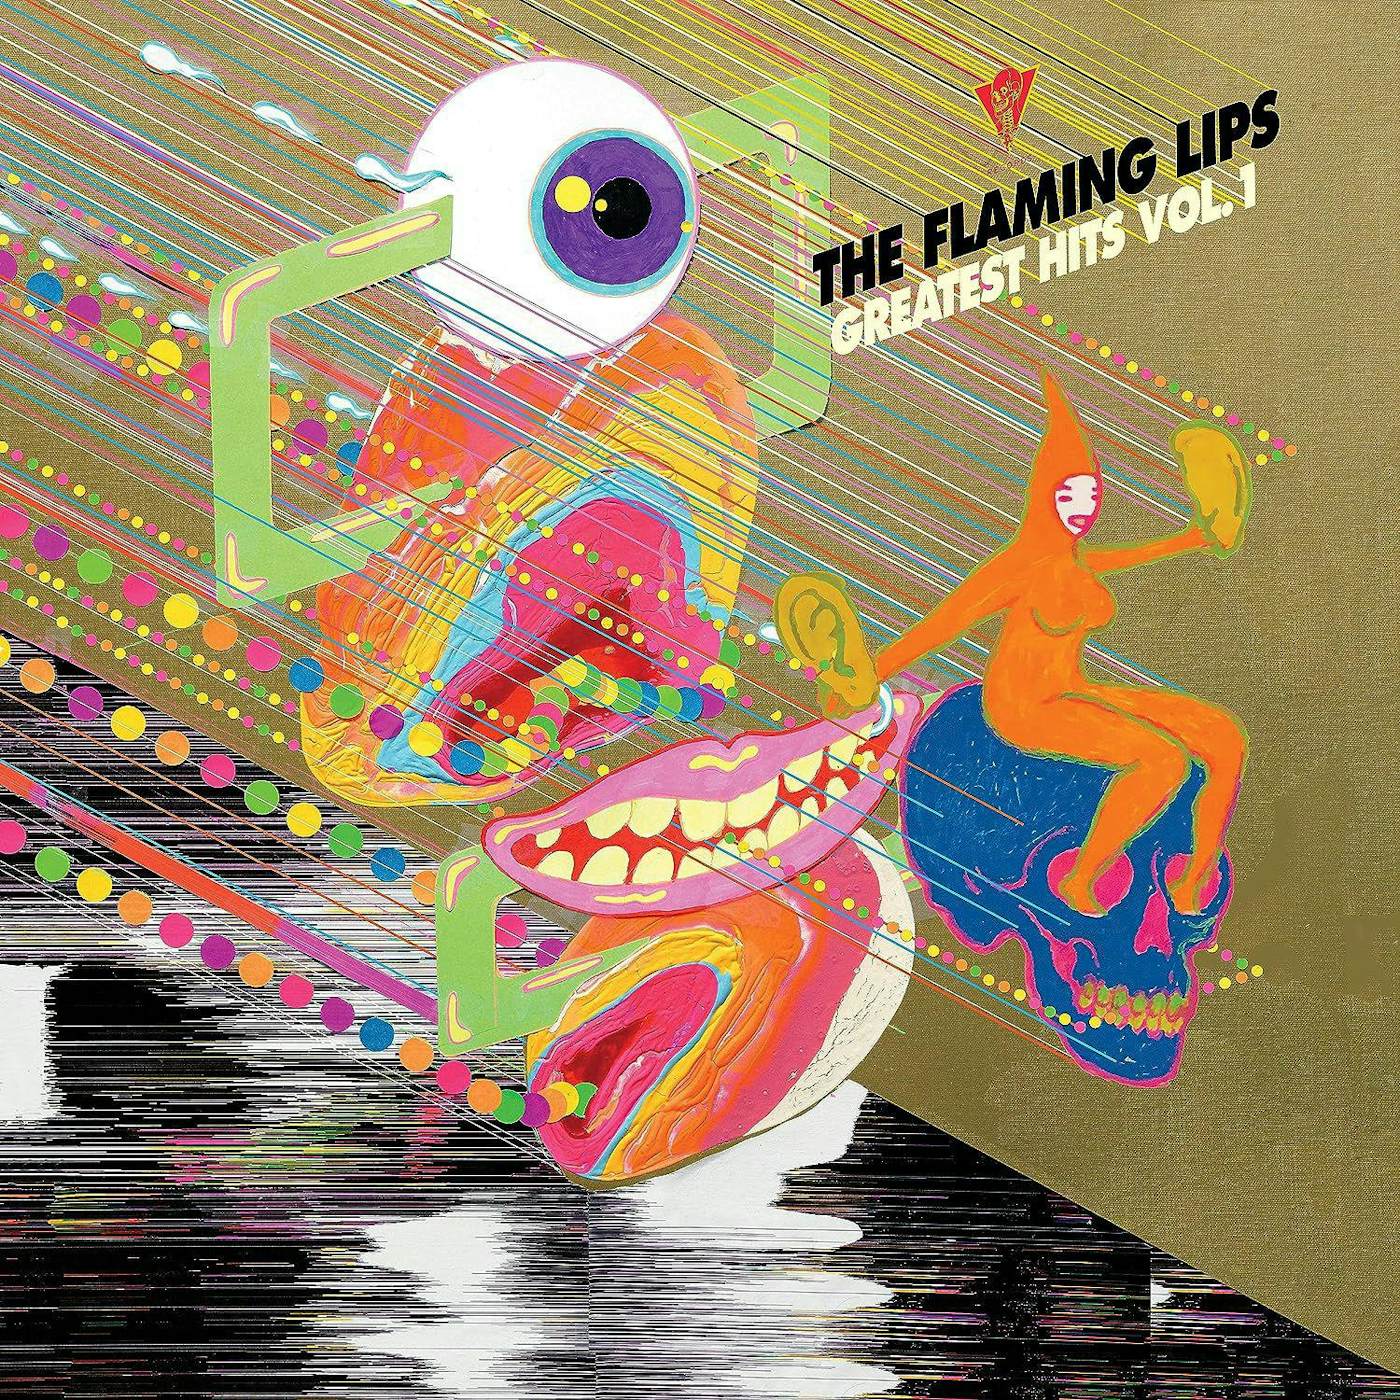 The Flaming Lips Greatest Hits Vol 1 Vinyl Record